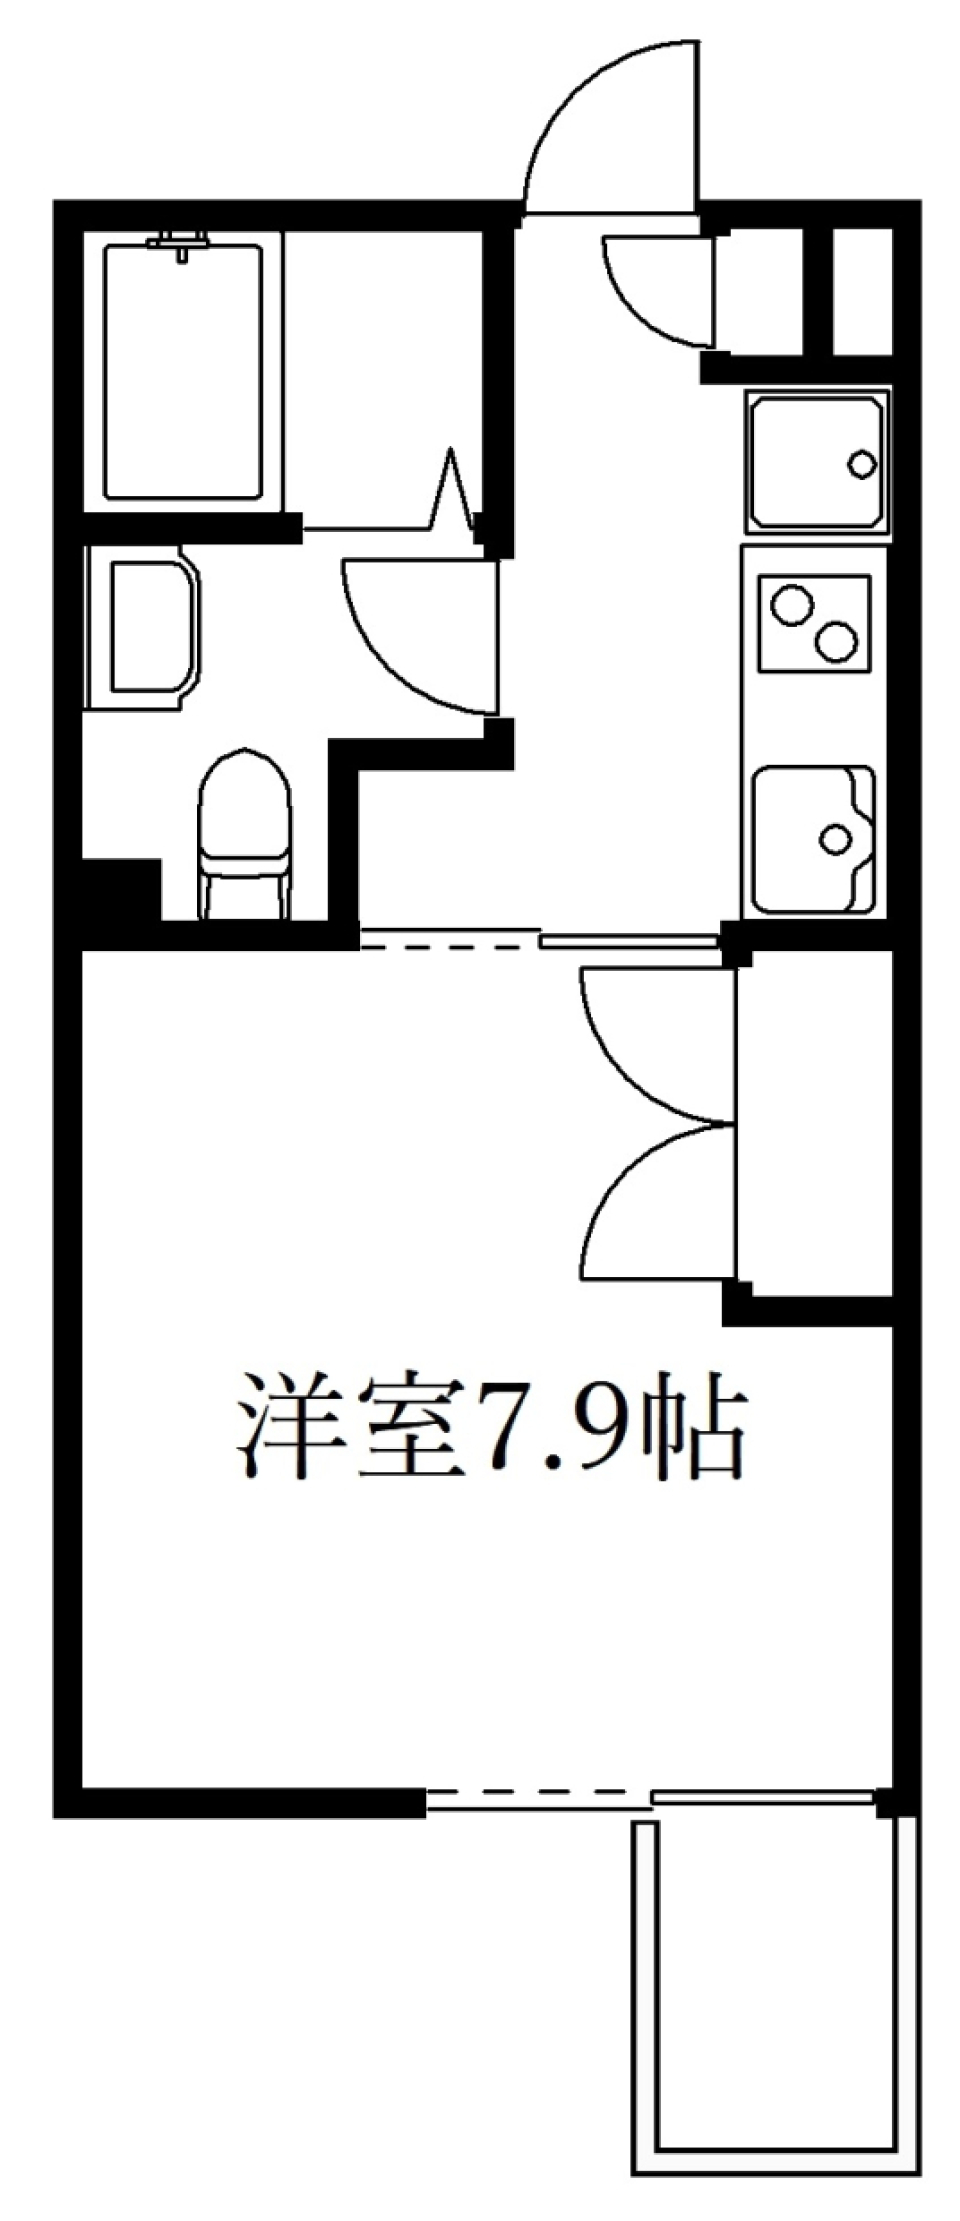 PARK RESIDENCE 西新宿　404号室の間取り図